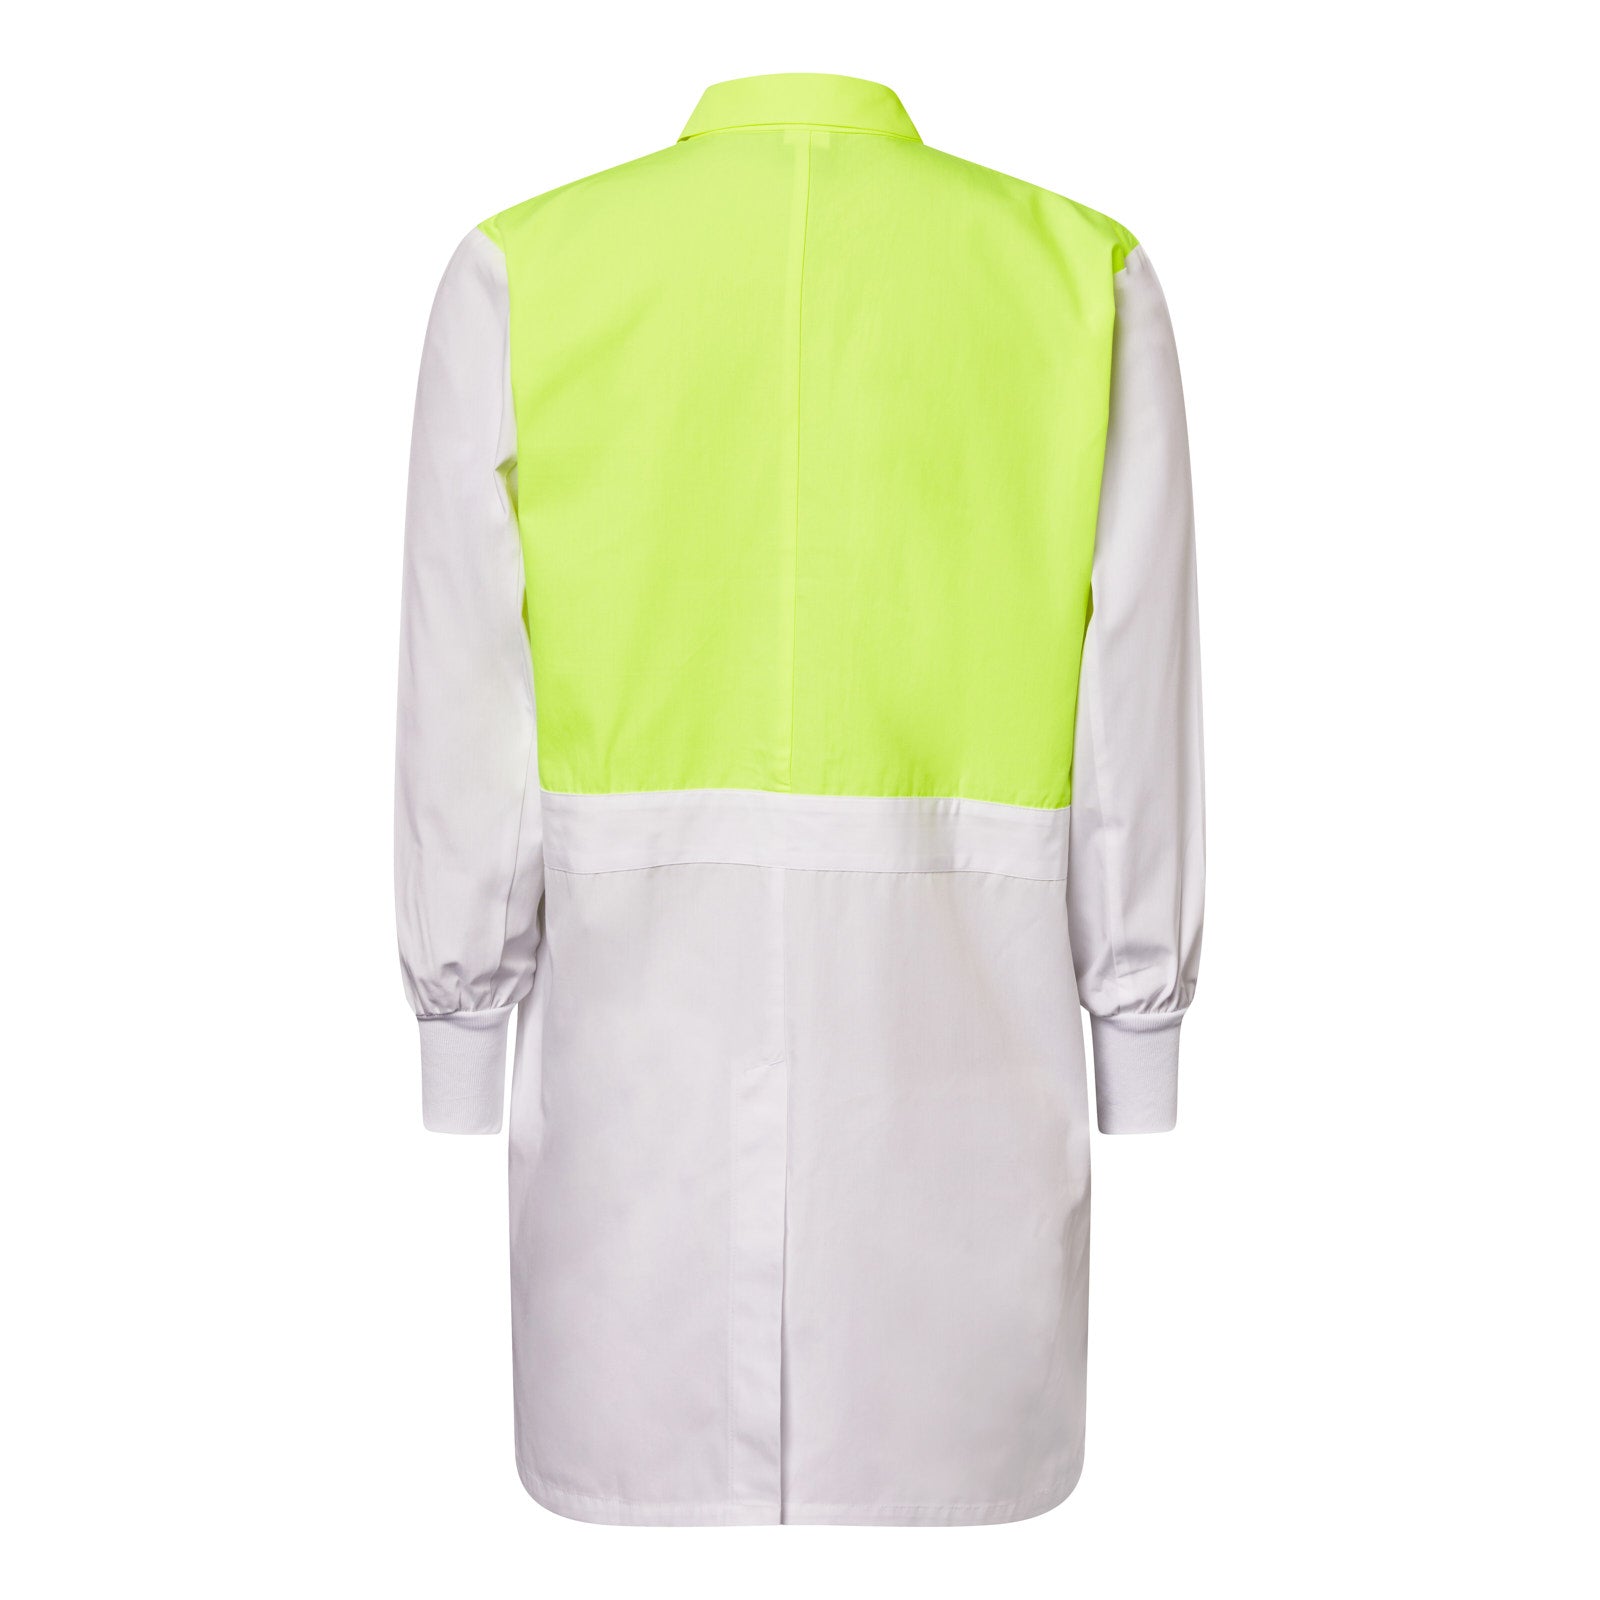 White Yellow Food Industry Dust Coat - made by Workcraft